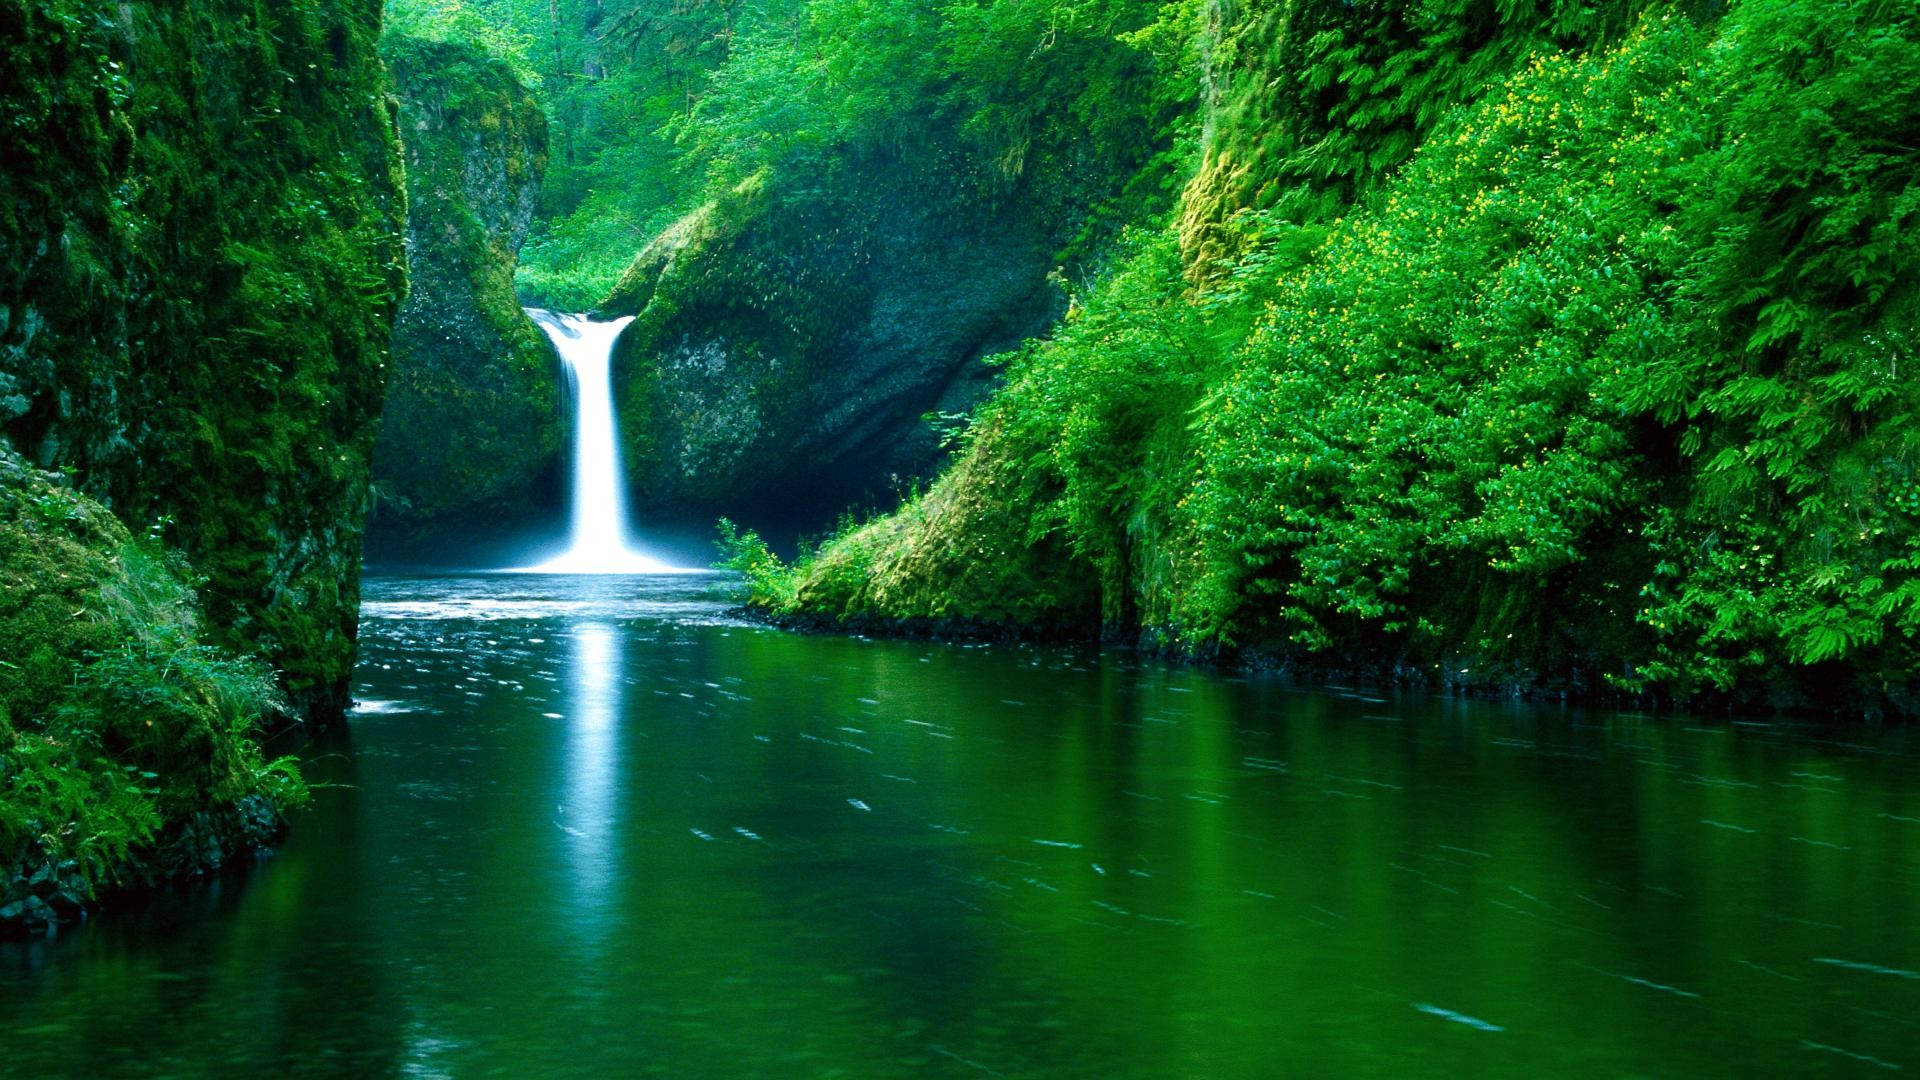 General 1920x1080 nature landscape green river forest waterfall water plants